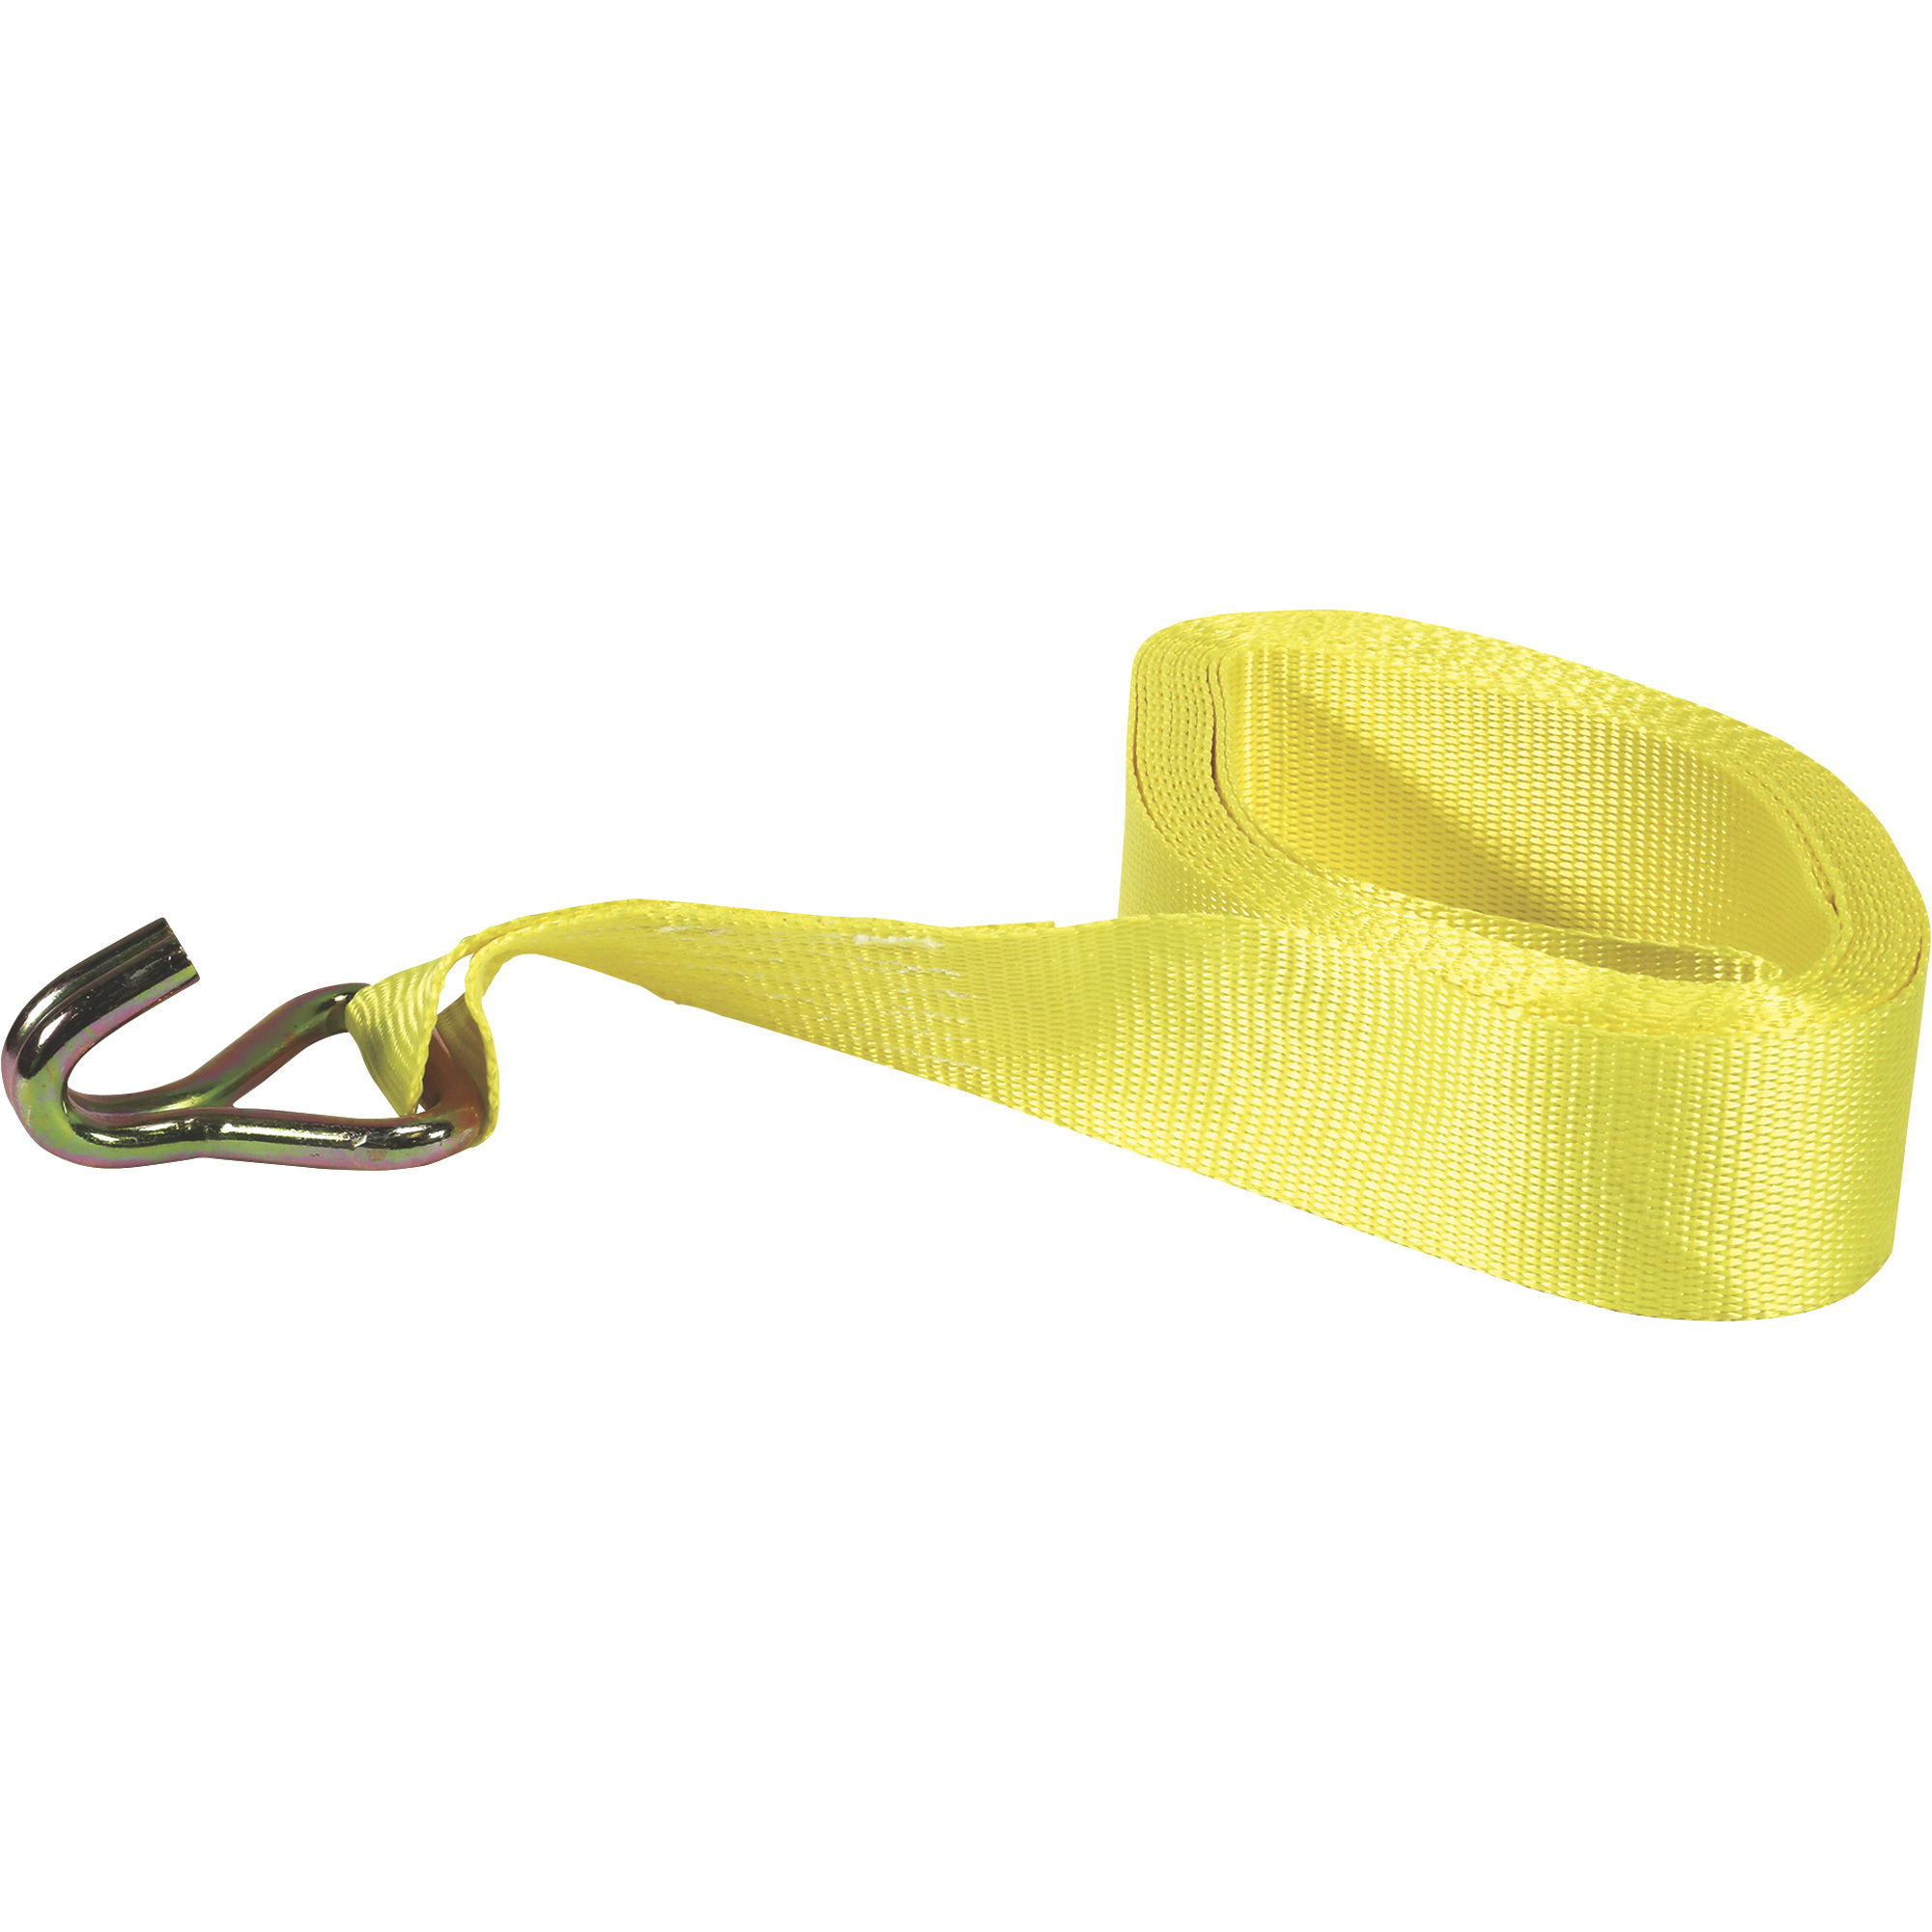 SmartStraps Winch Strap with J-Hook, 20ft.L x 2Inch W, 5,000-Lb. Capacity, Yellow, Model 280